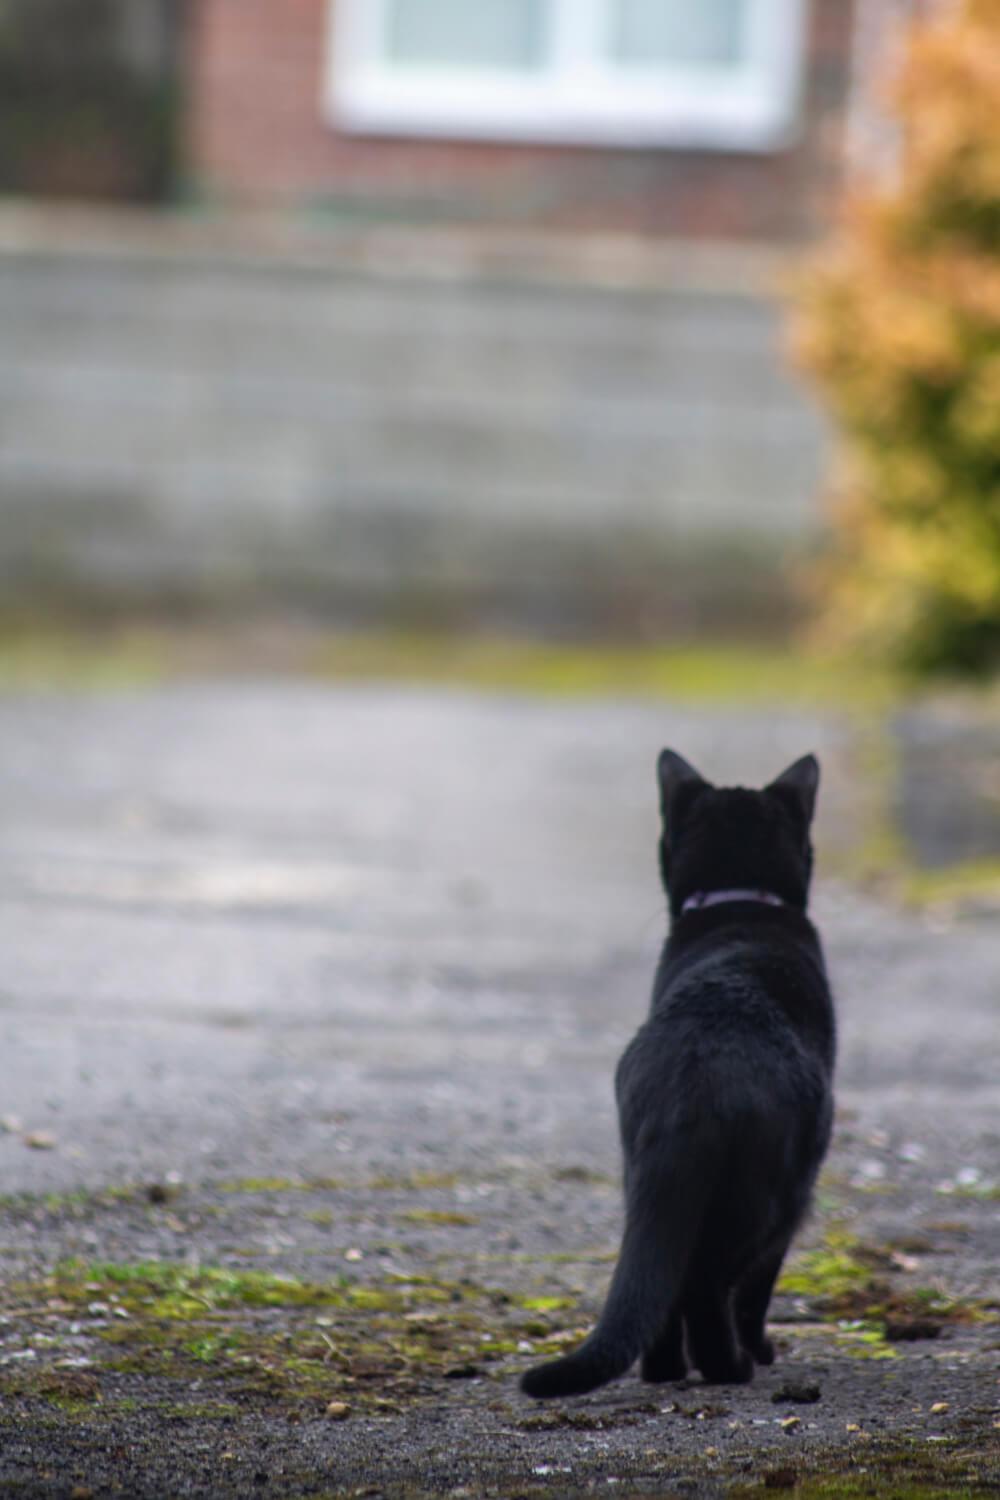 A black cat looking away from the camera down a concrete path